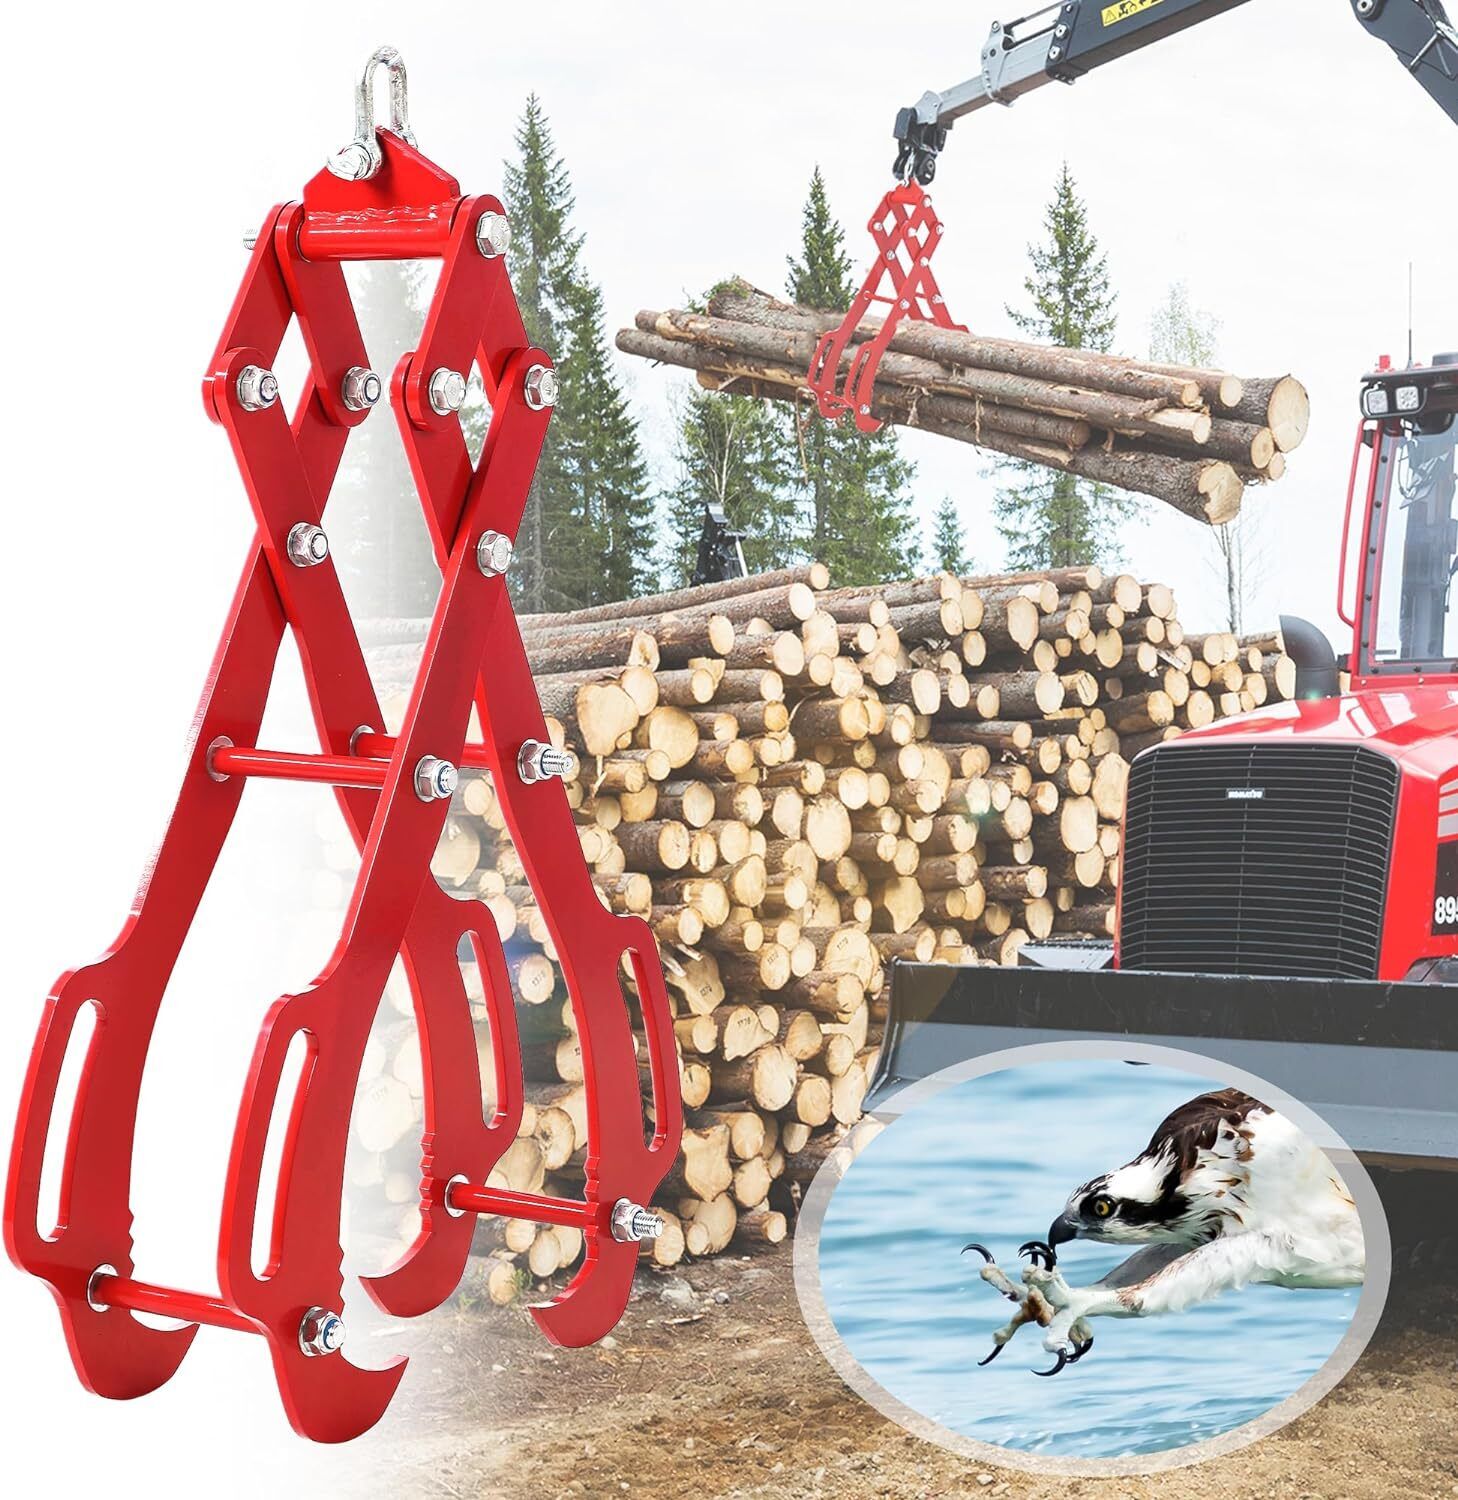 4 Claw Timber Claw Hook 36in Log Lifting Tongs Grapple Claw Lumber Skid Grabber